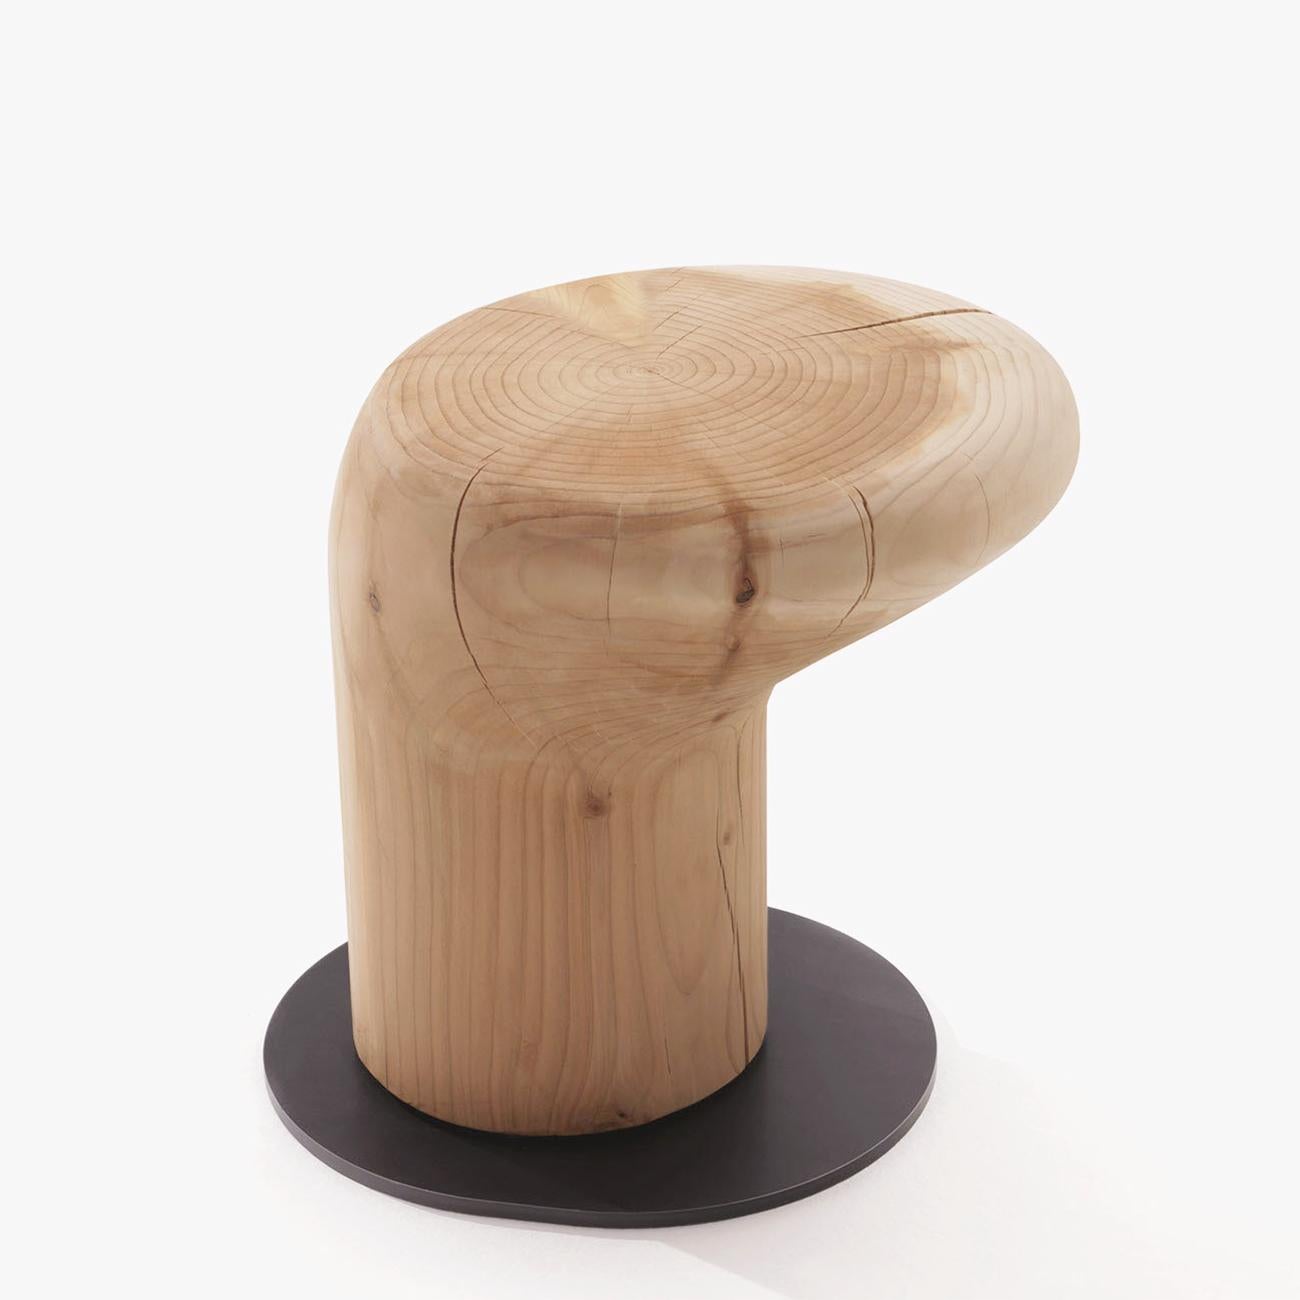 Stool Mooring Cedar all hand-crafted
in solid cedar wood. With iron base plate in lacquered finish.
Wood treated with natural pine extracts.
Each piece is unique and cedar wooden pattern depending 
on the wooden blocks used to make the